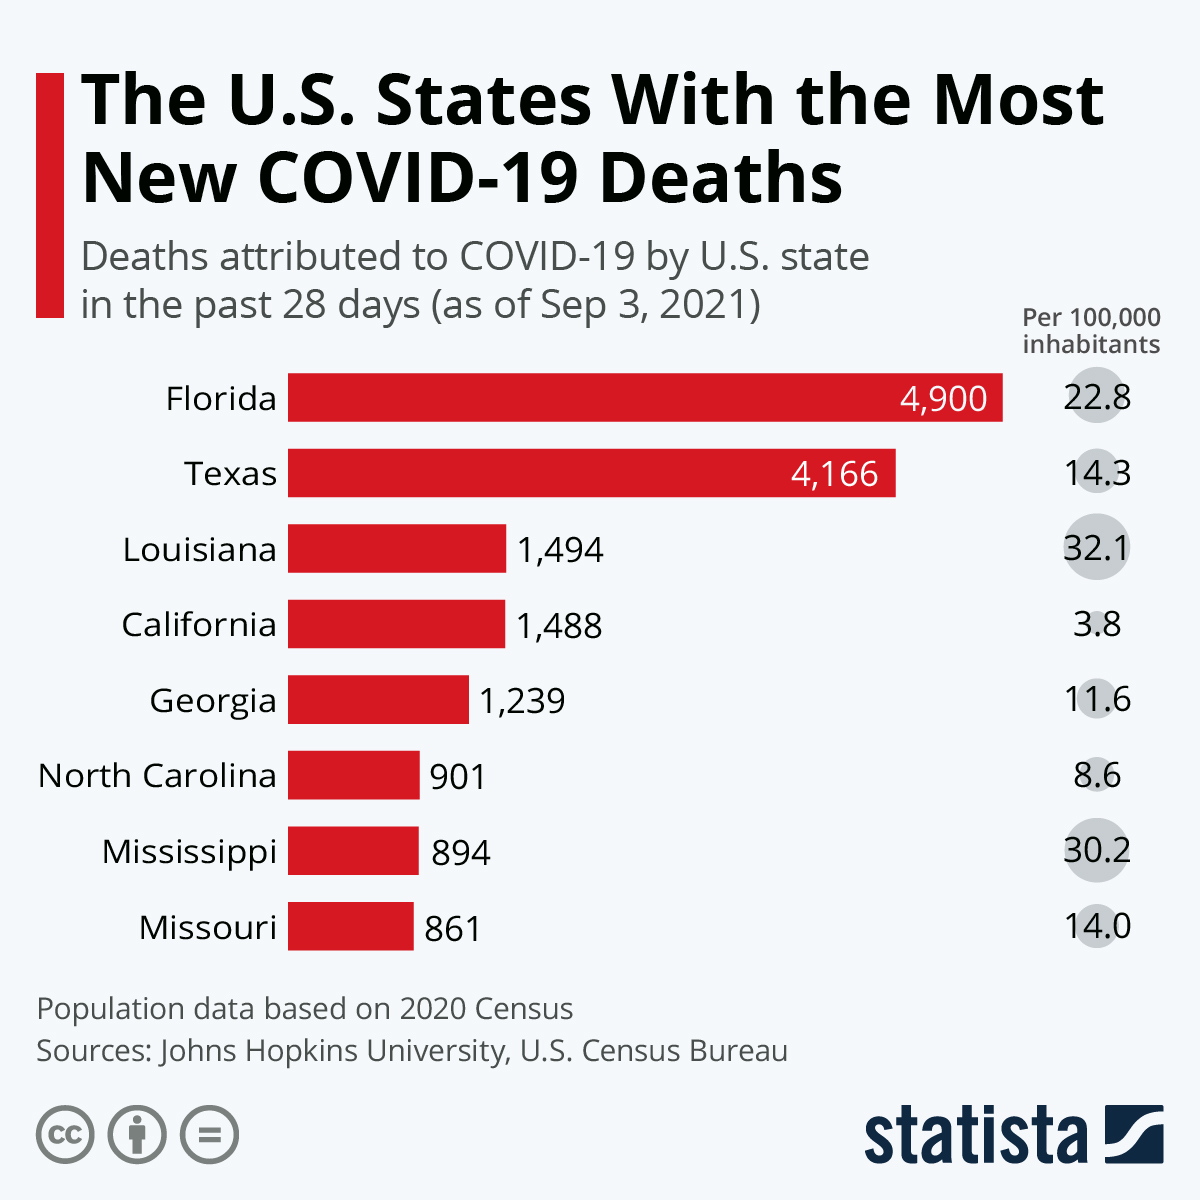 The U.S. States With the Most New COVID-19 Deaths